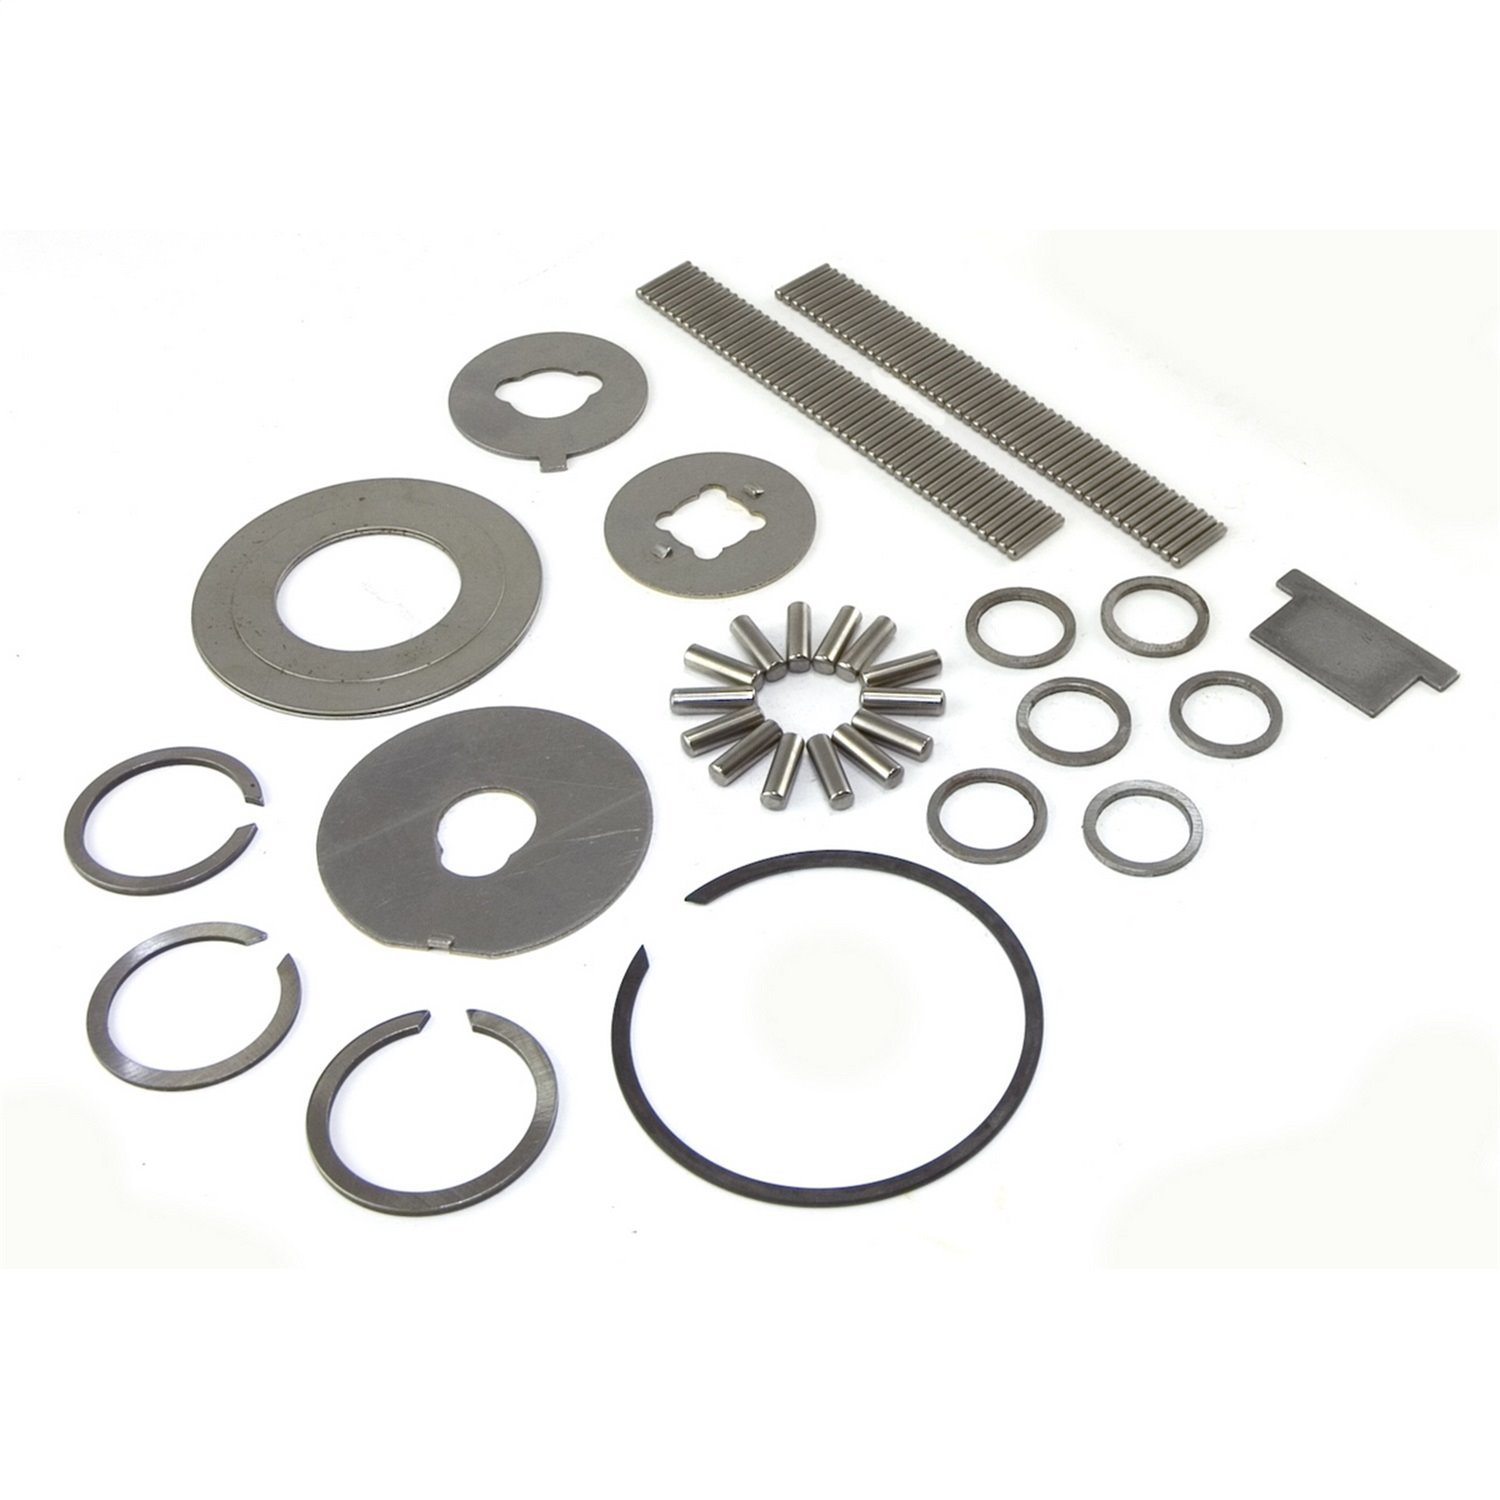 T90 Small Parts Kit 1946-1971 Jeep CJ and Wrangler By Omix-ADA